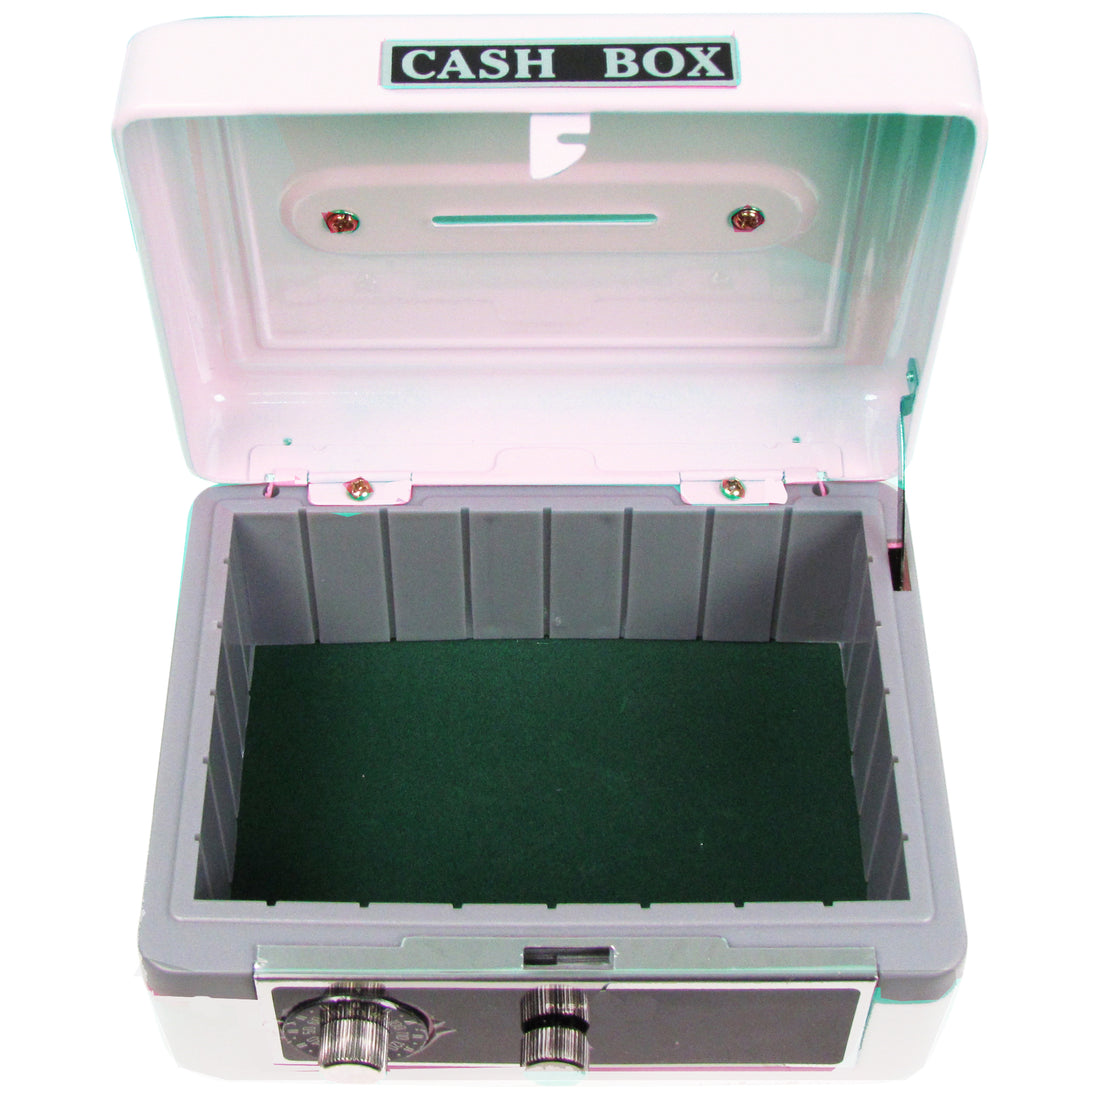 Personalized White Cash Box with Wild West design